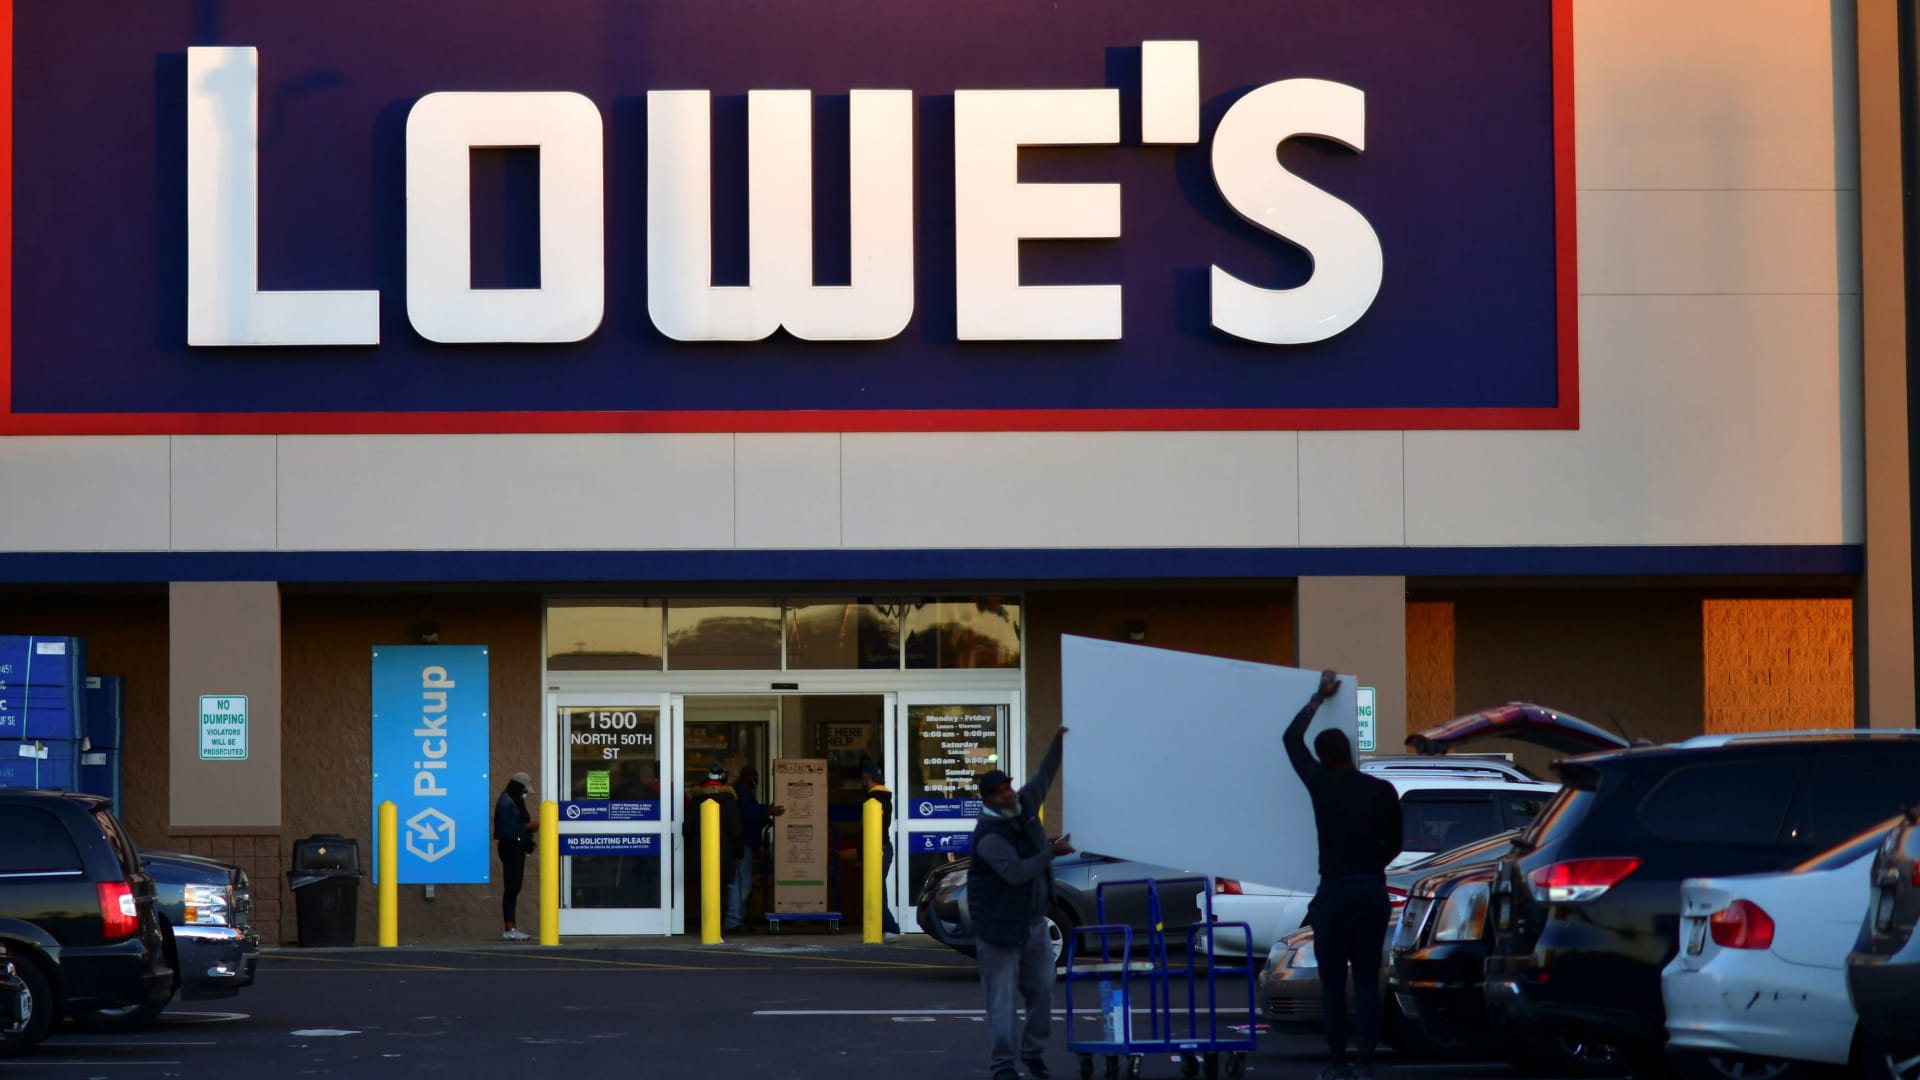 Citi downgrades Lowe’s, warns investors to brace for an earnings miss as housing market slows